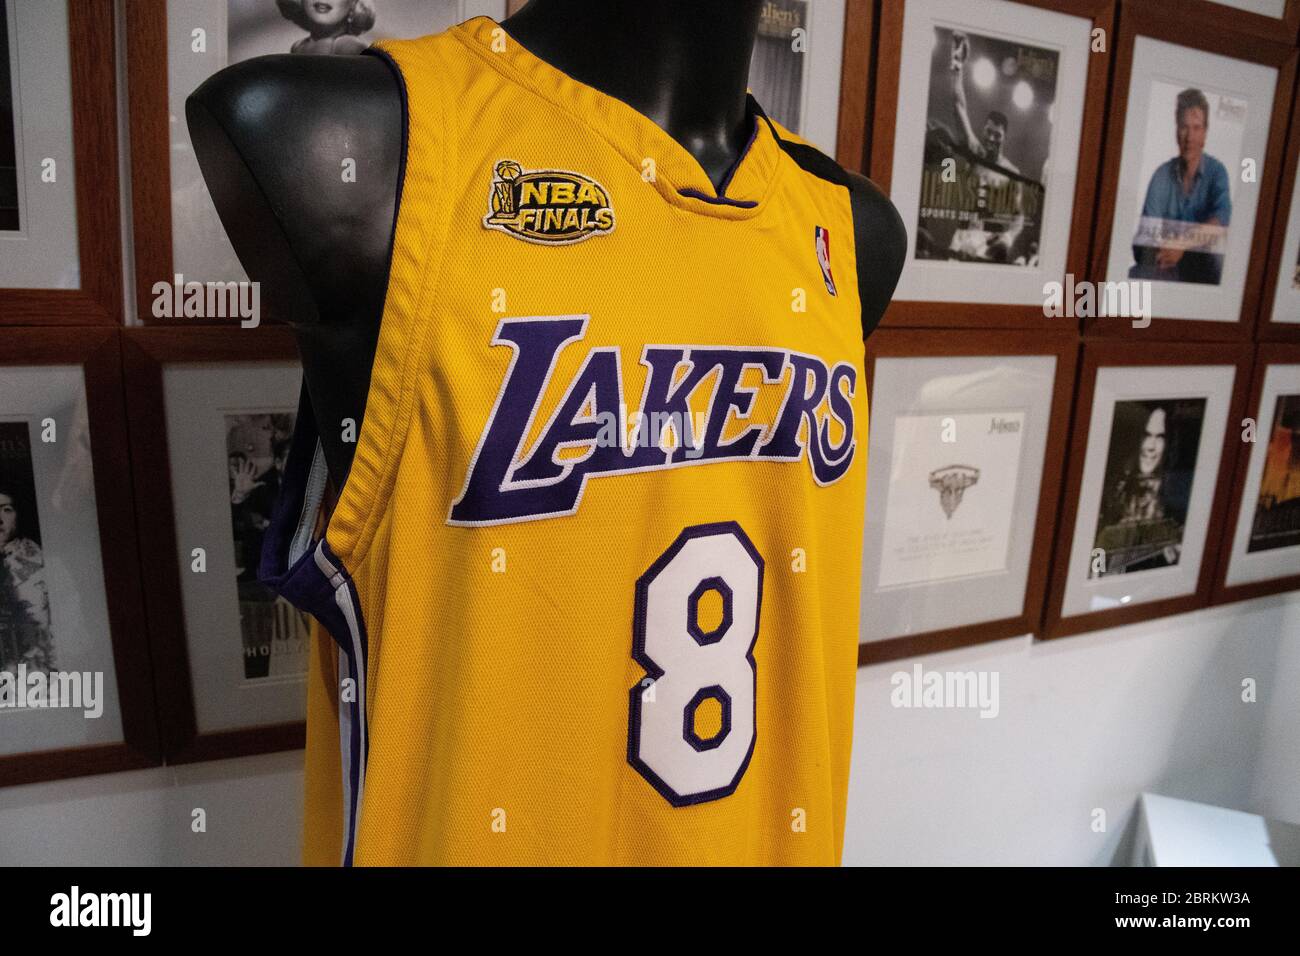 Kobe Bryant Signed Game-Worn Jersey to Be Auctioned Off, Could